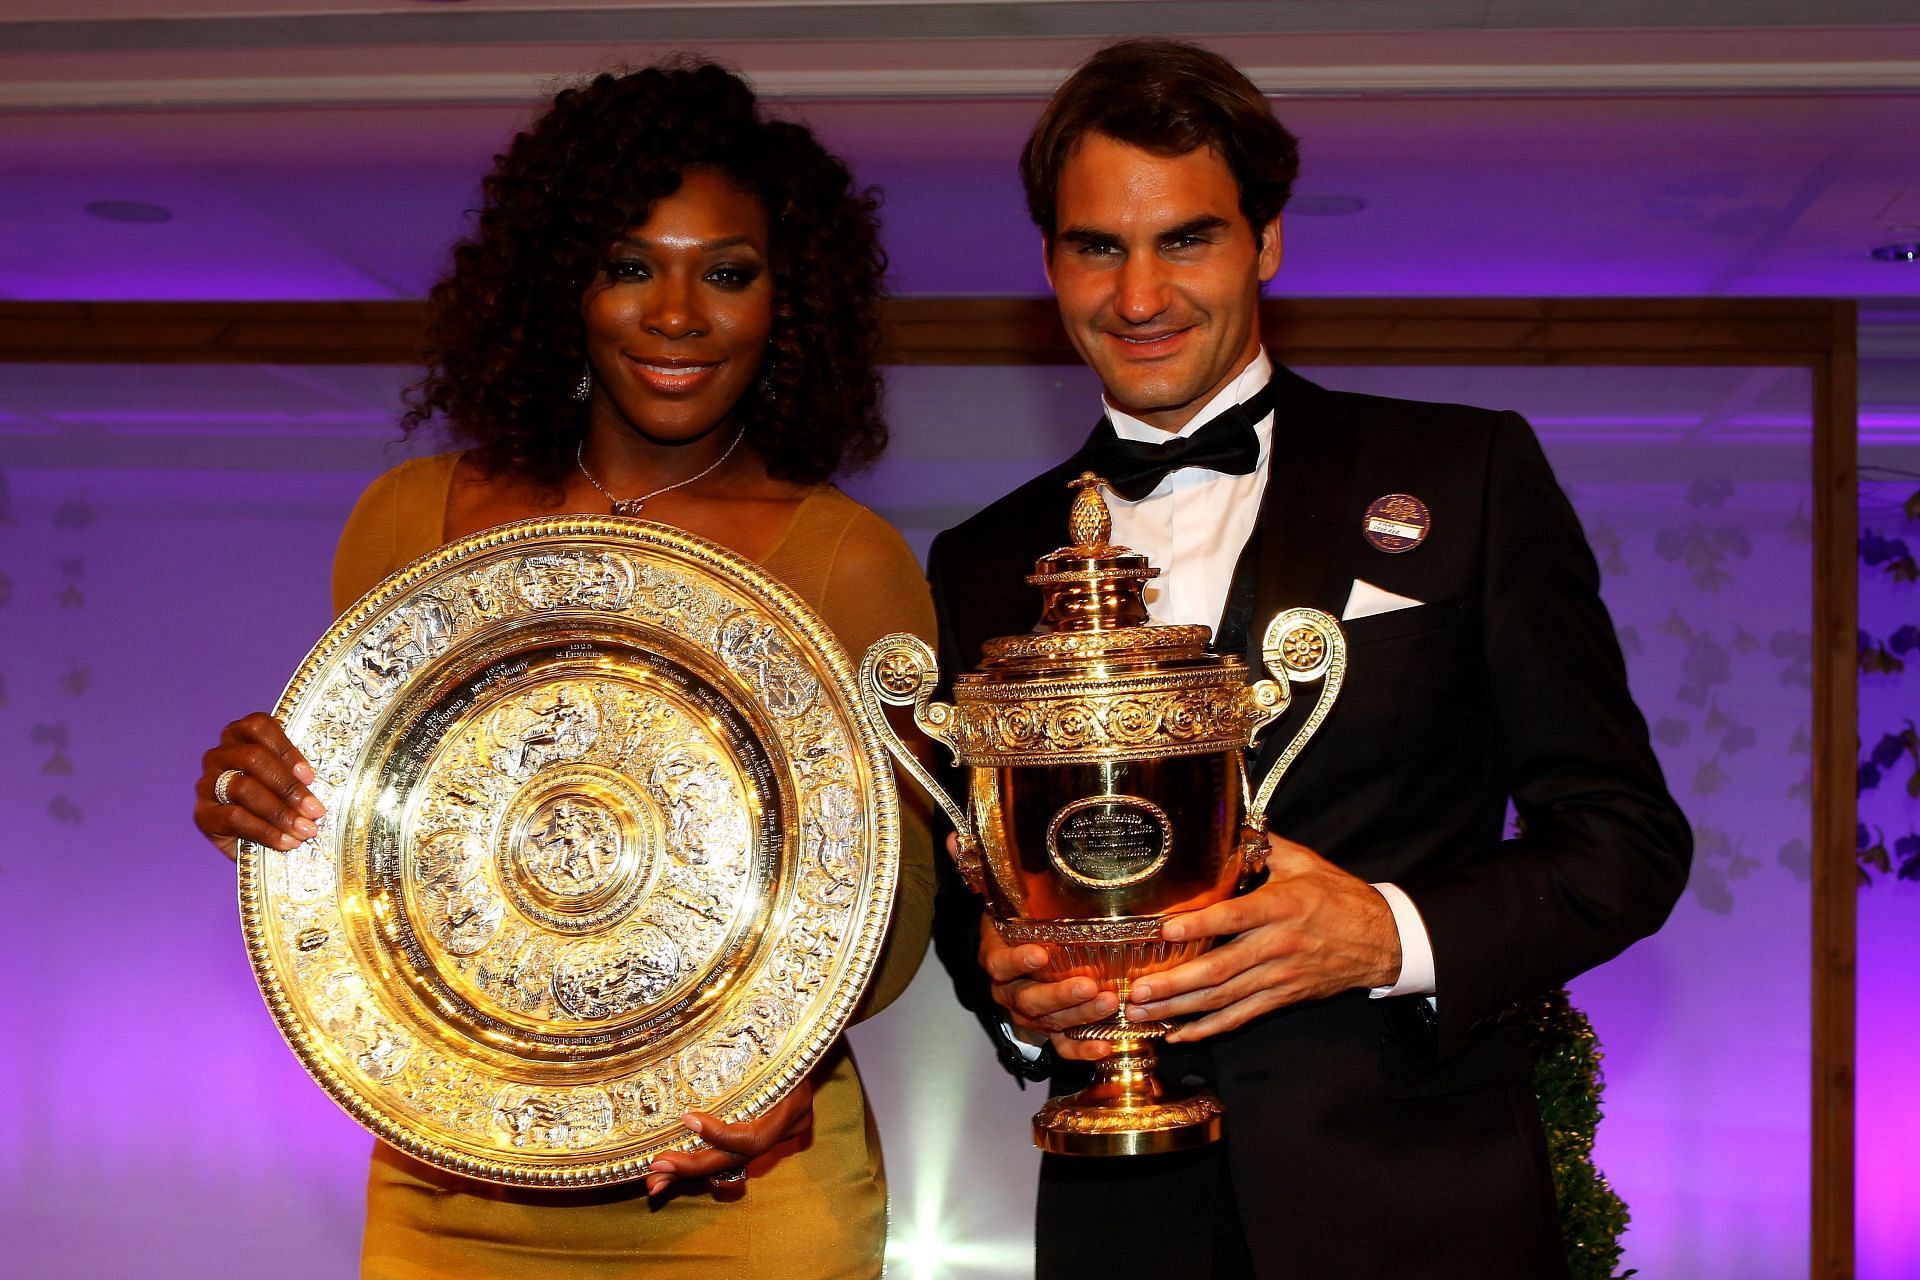 Serena Williams and Roger Federer with their trophies at the 2012 Wimbledon Championships